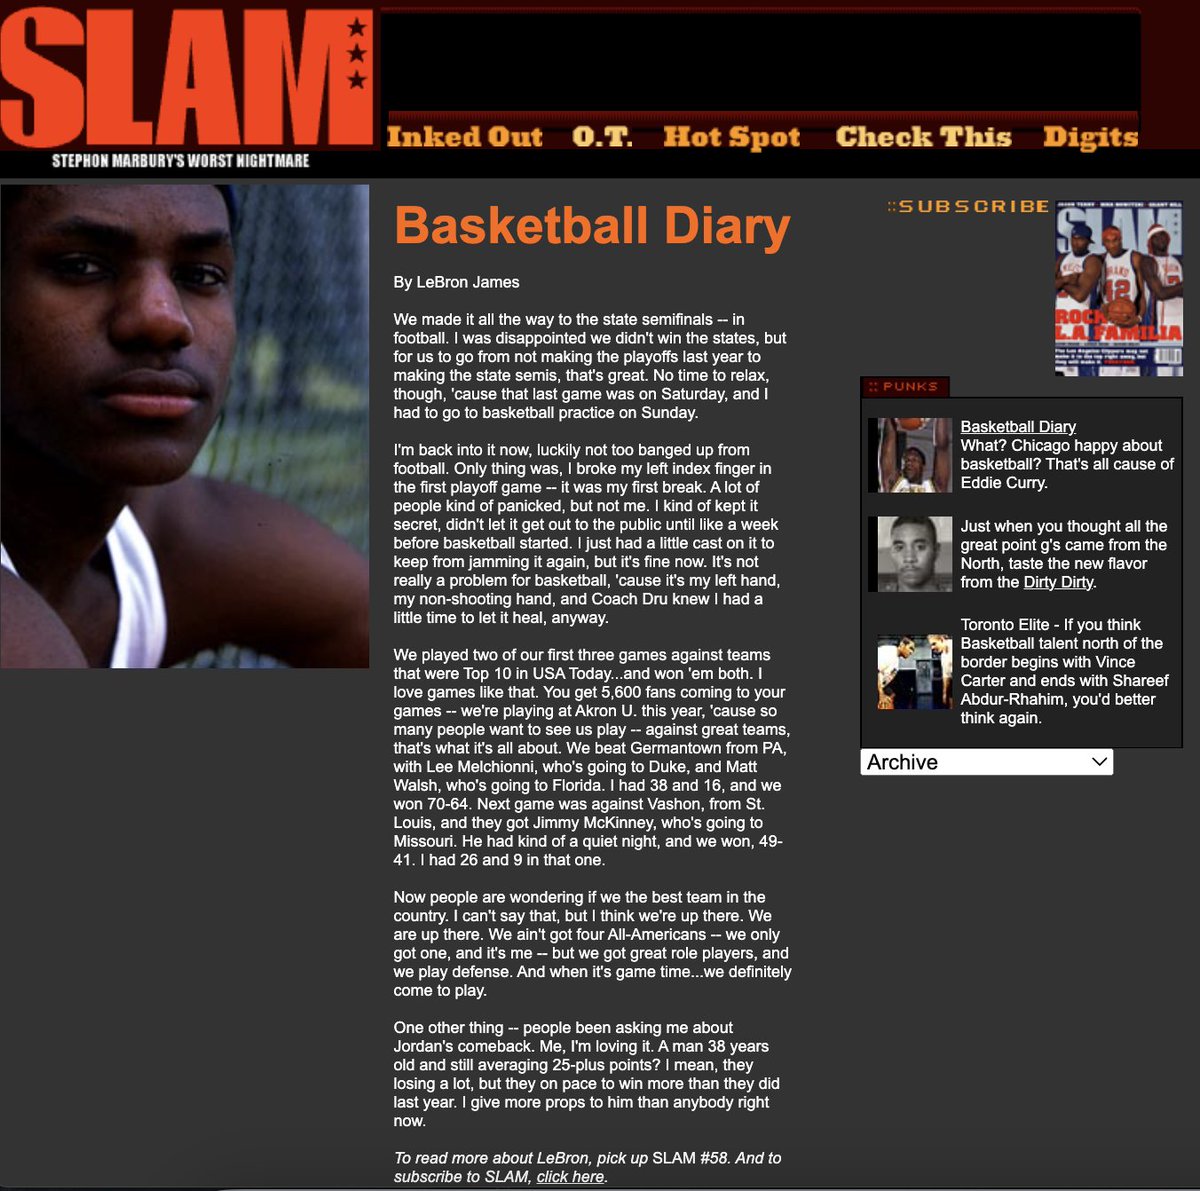 A screenshot of SLAM's website on Feb 7, 2002 And I agree - a 38-year-old averaging 25+ points per game is crazy